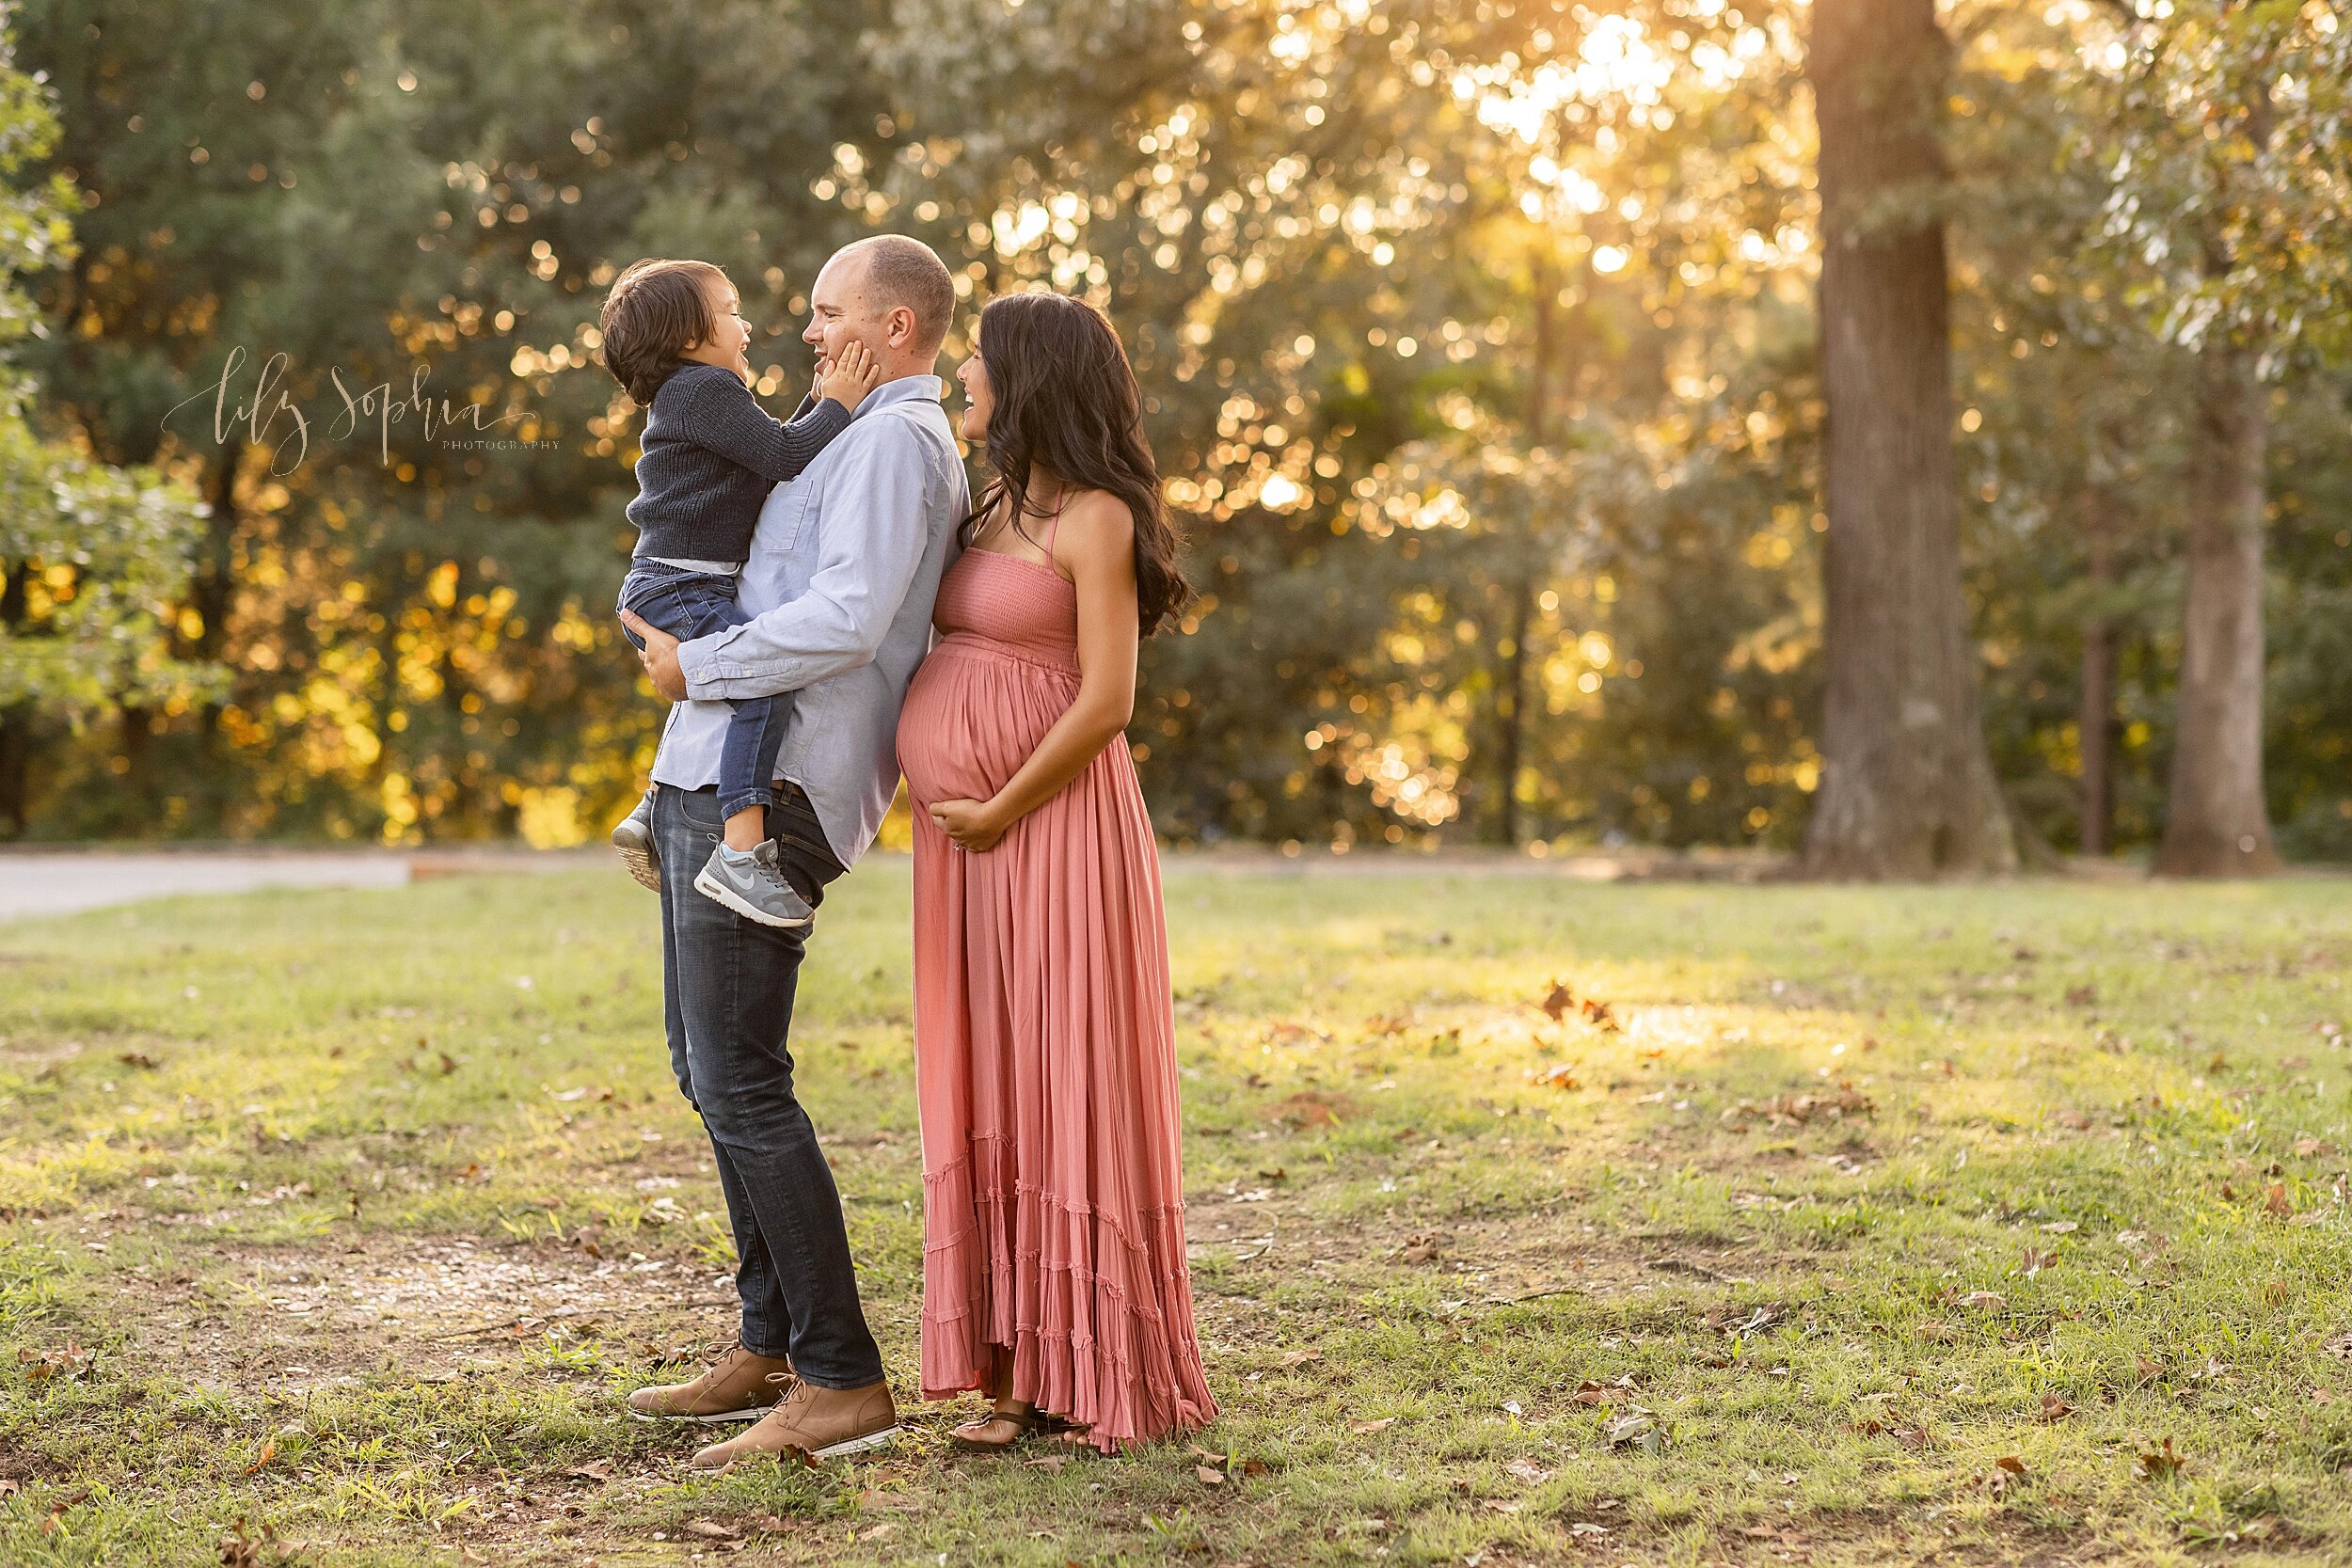  Maternity photo session of a father holding his son who is facing him and putting his hands on his cheeks while his expectant wife stands holding the bottom of her belly behind him and peeks over his left shoulder as the sun is setting in a park nea